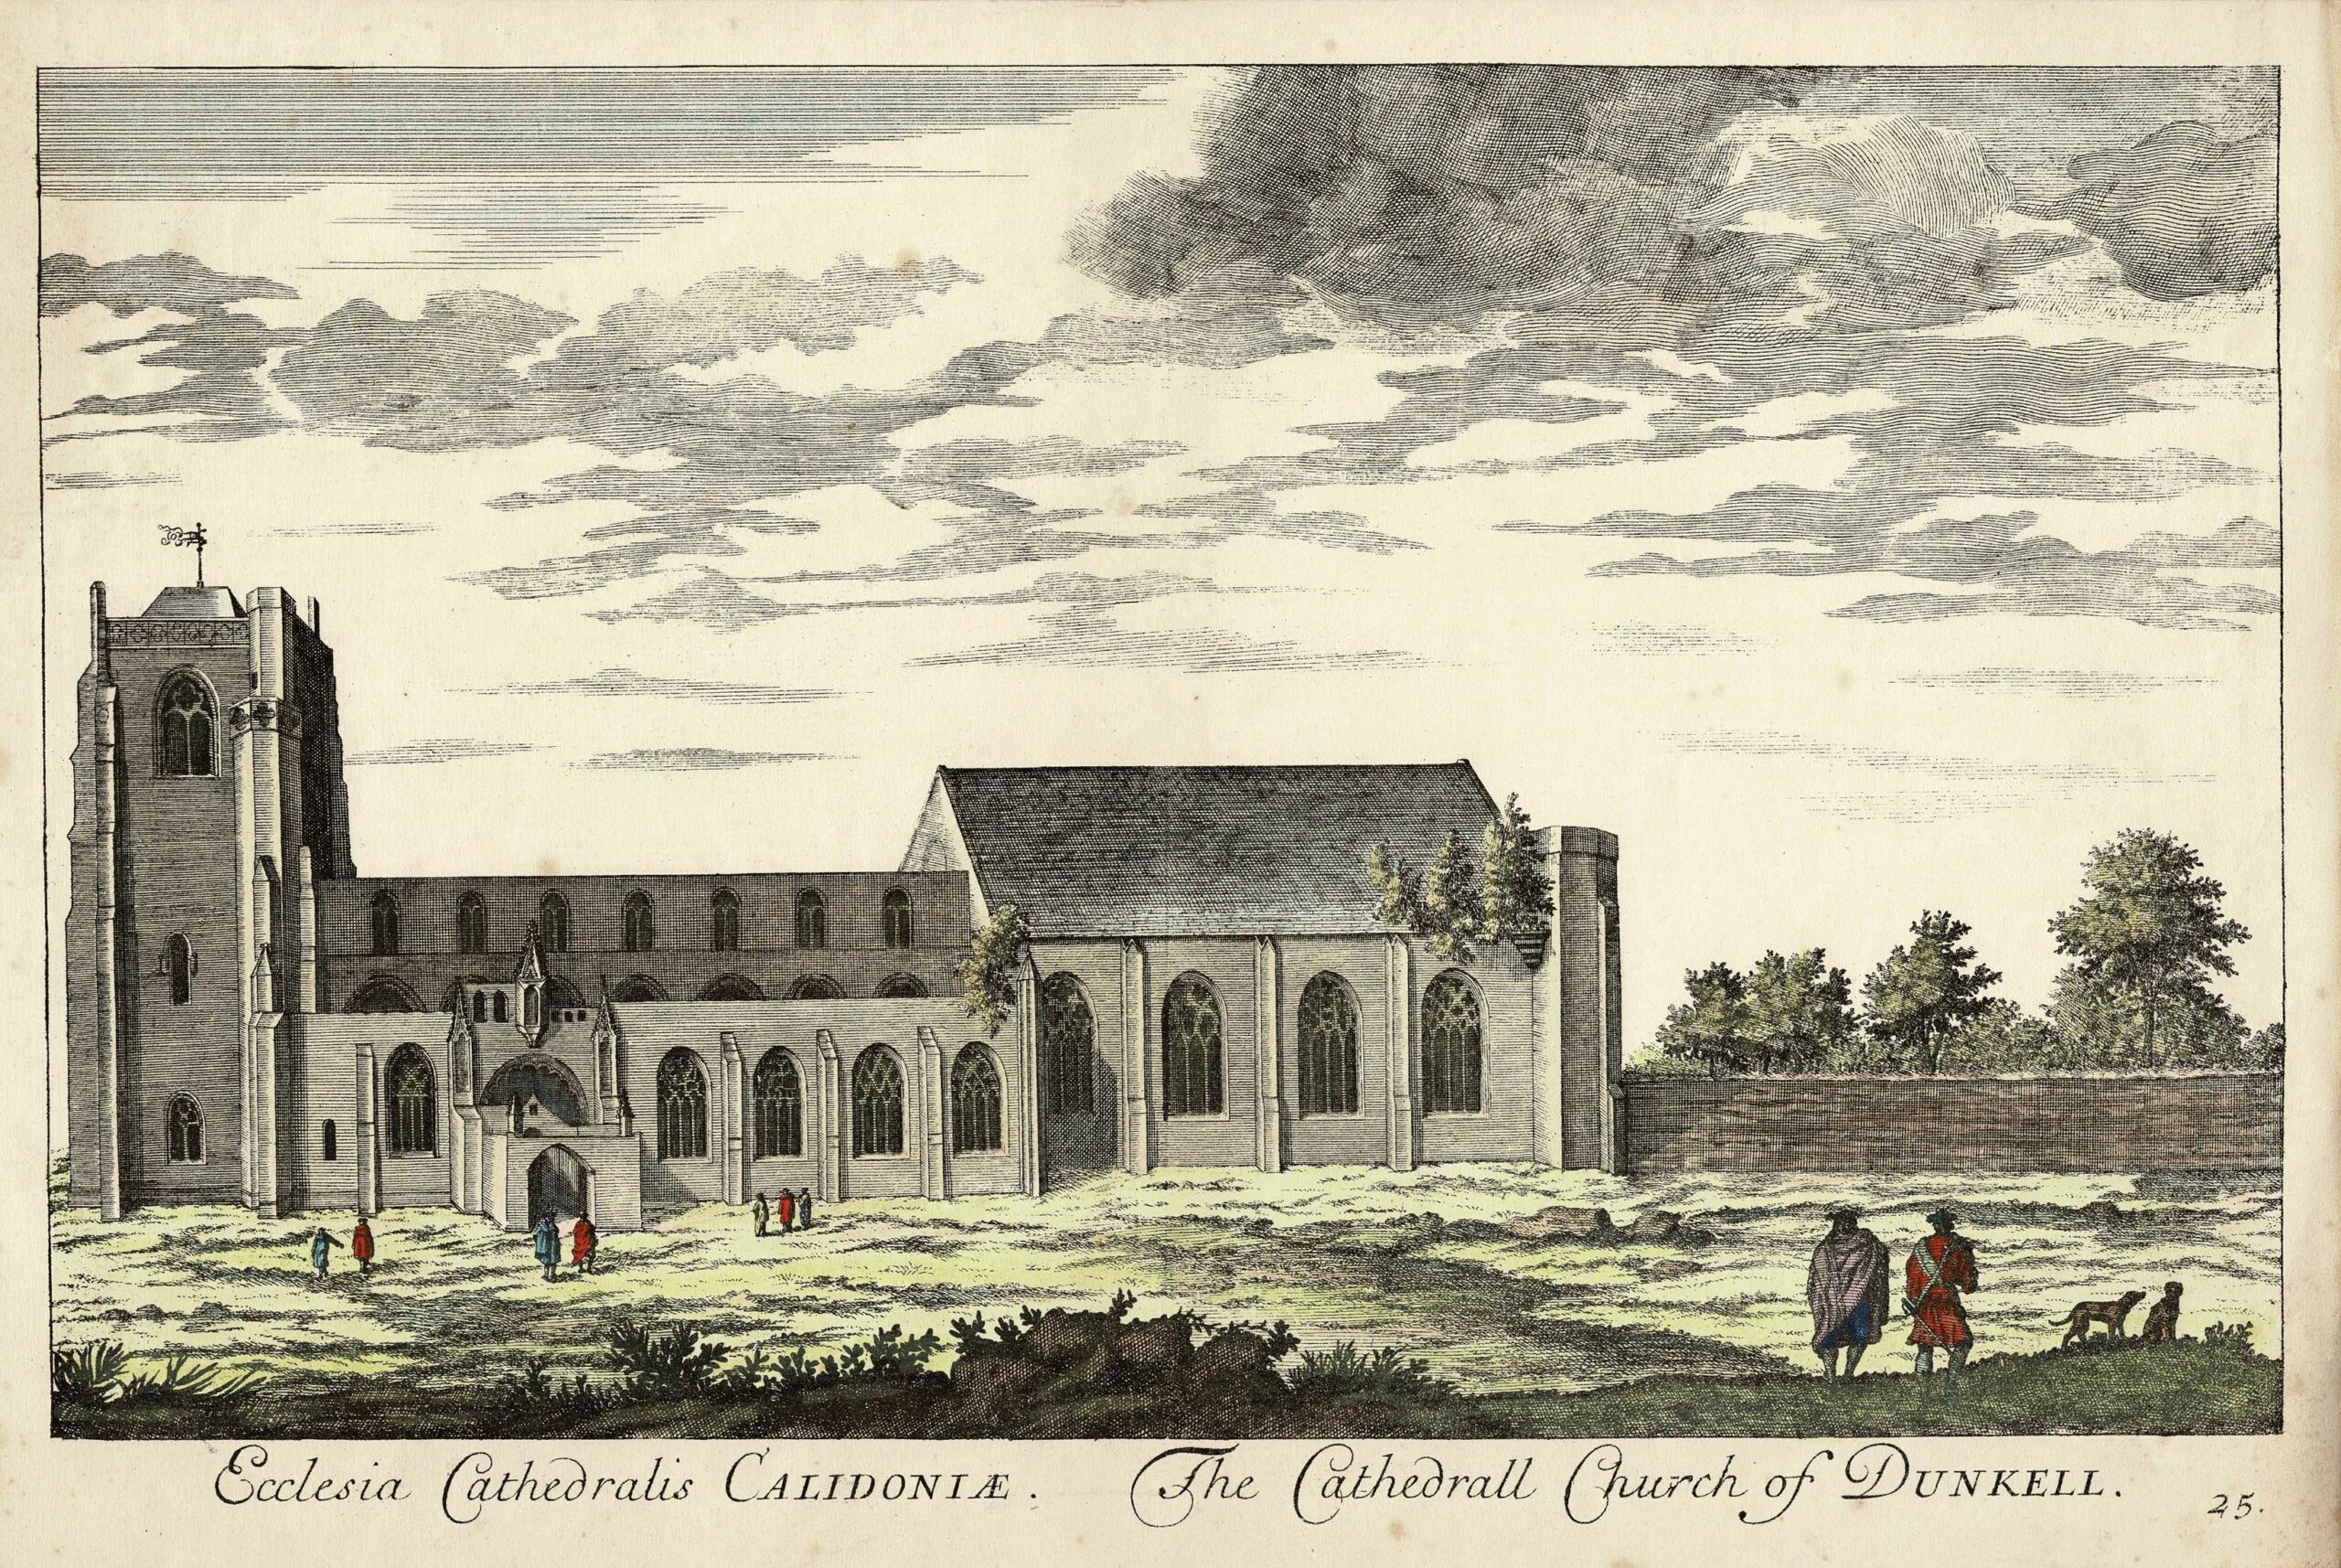 Dunkeld, Dunkeld Cathedral. View of Dunkeld Cathedral from South copied from 'Theatrum Scotiae' by John Slezer. Titled: 'Ecclesia Cathedralis CALIDONIAE. The Cathedrall Church of DUNKELL. 25'